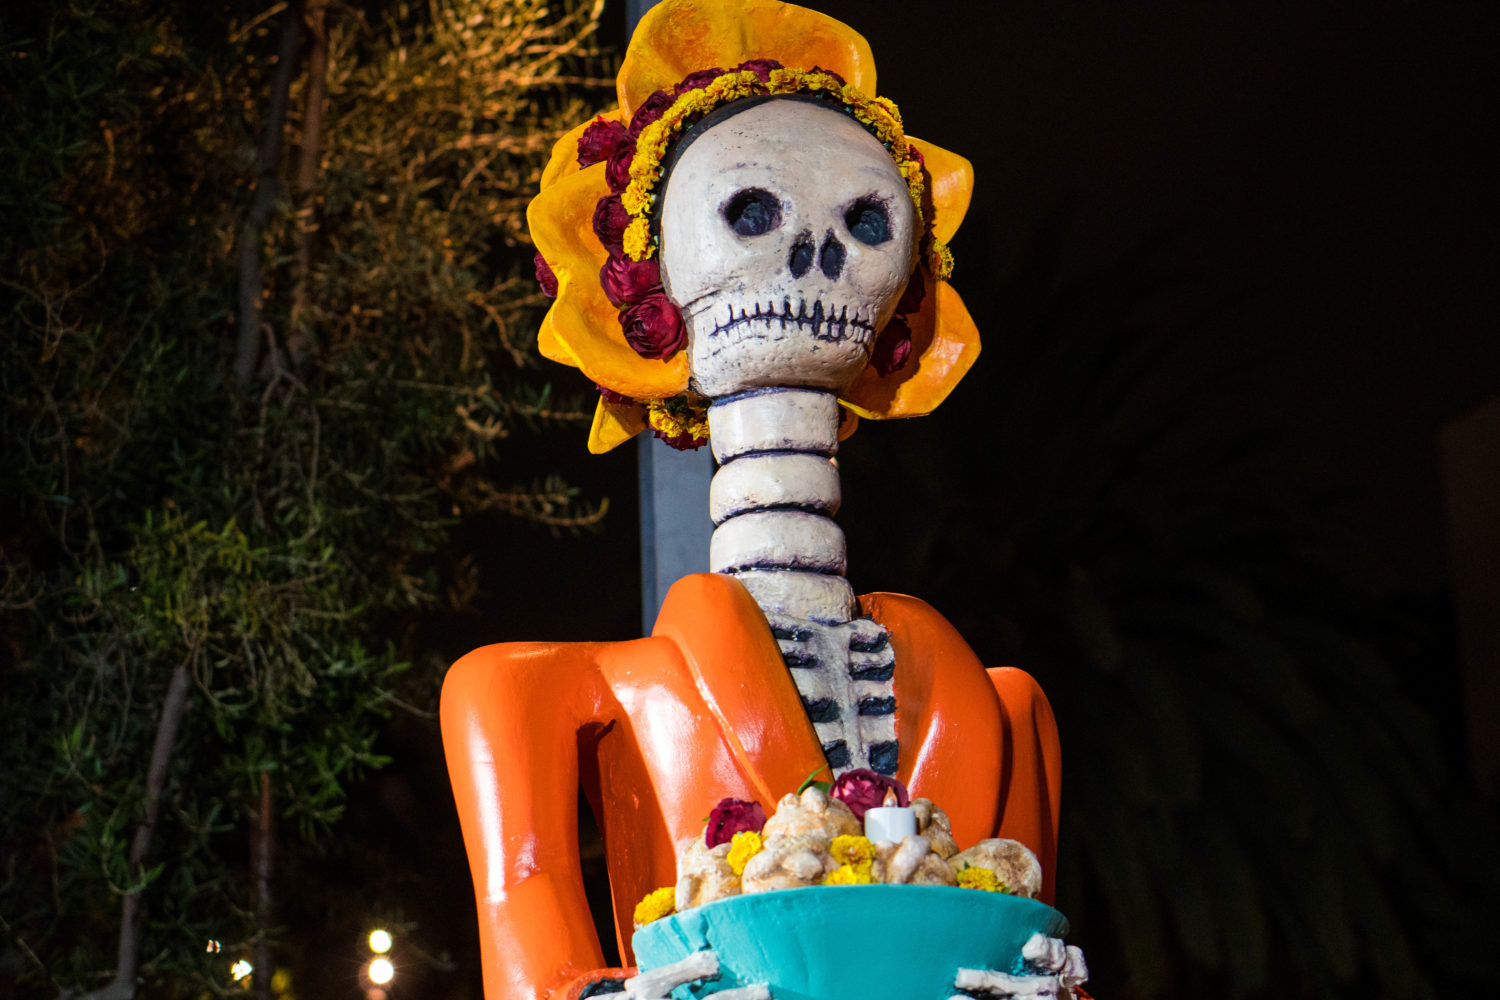 A 22calavera catrina22 themed altar by LOUD and LA Family AIDS Network at Grand Parks Downtown Día de los Muertos 2021 photo by Michelle Moro for Grand Park